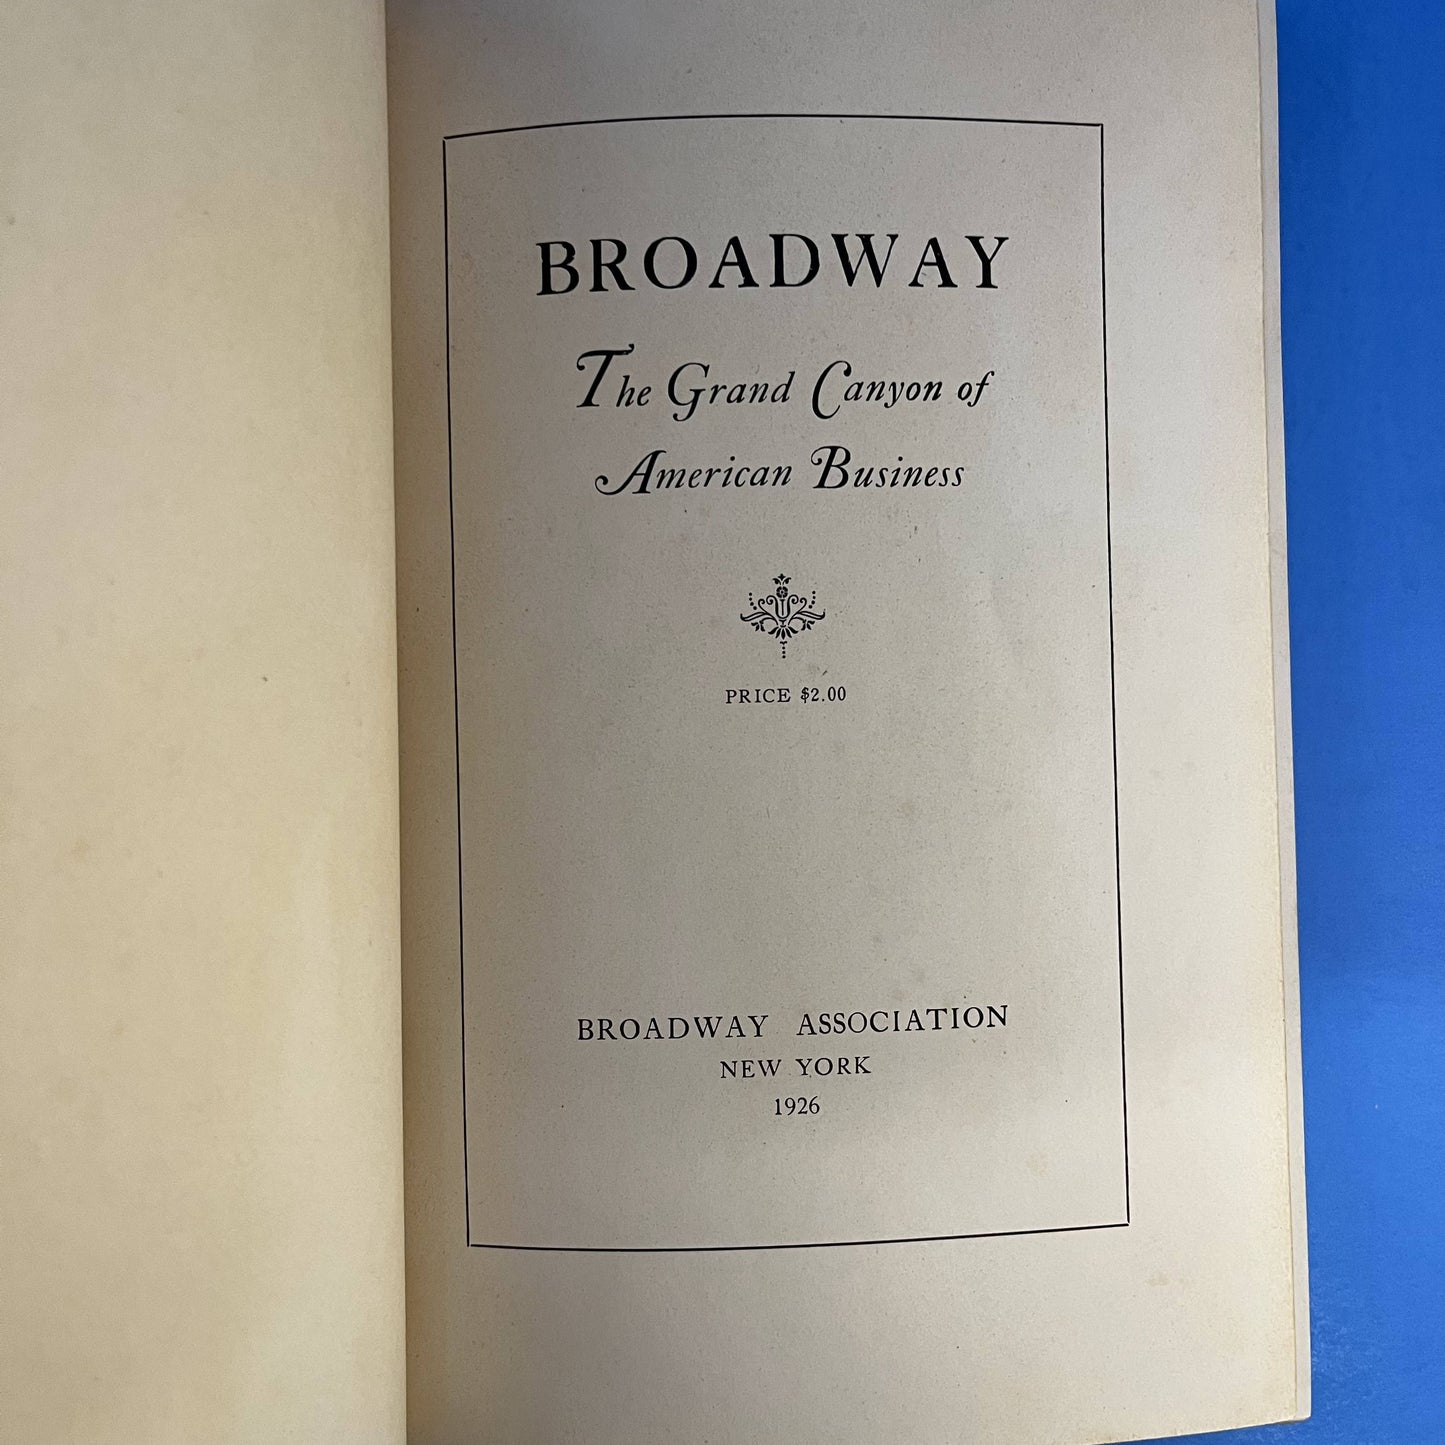 Broadway: The Grand Canyon of American Business